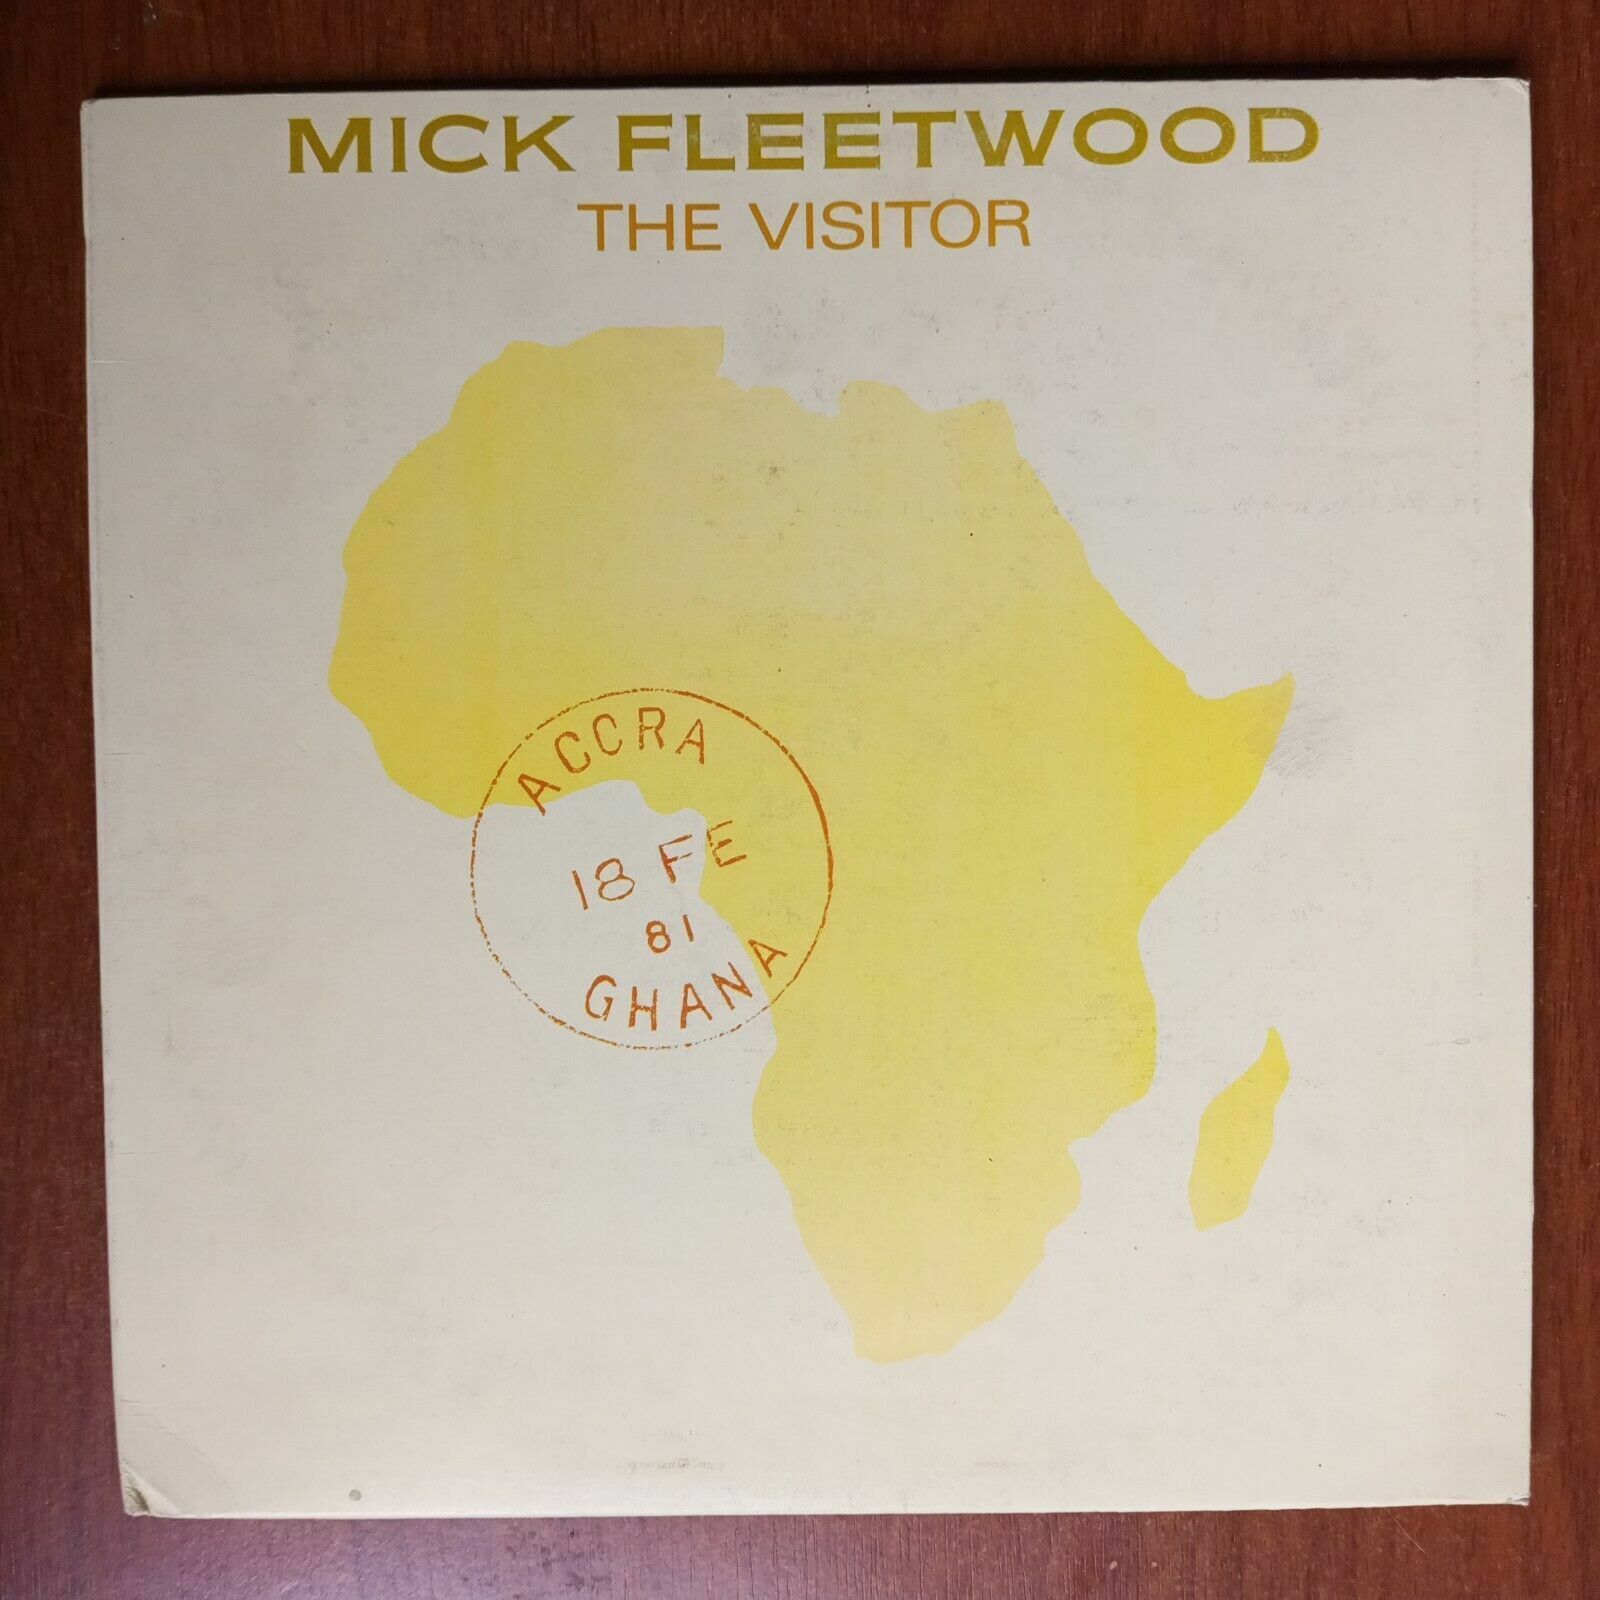 Mick Fleetwood – The Visitor [1981] Vinyl LP Electronic Synth Pop Classic Rock